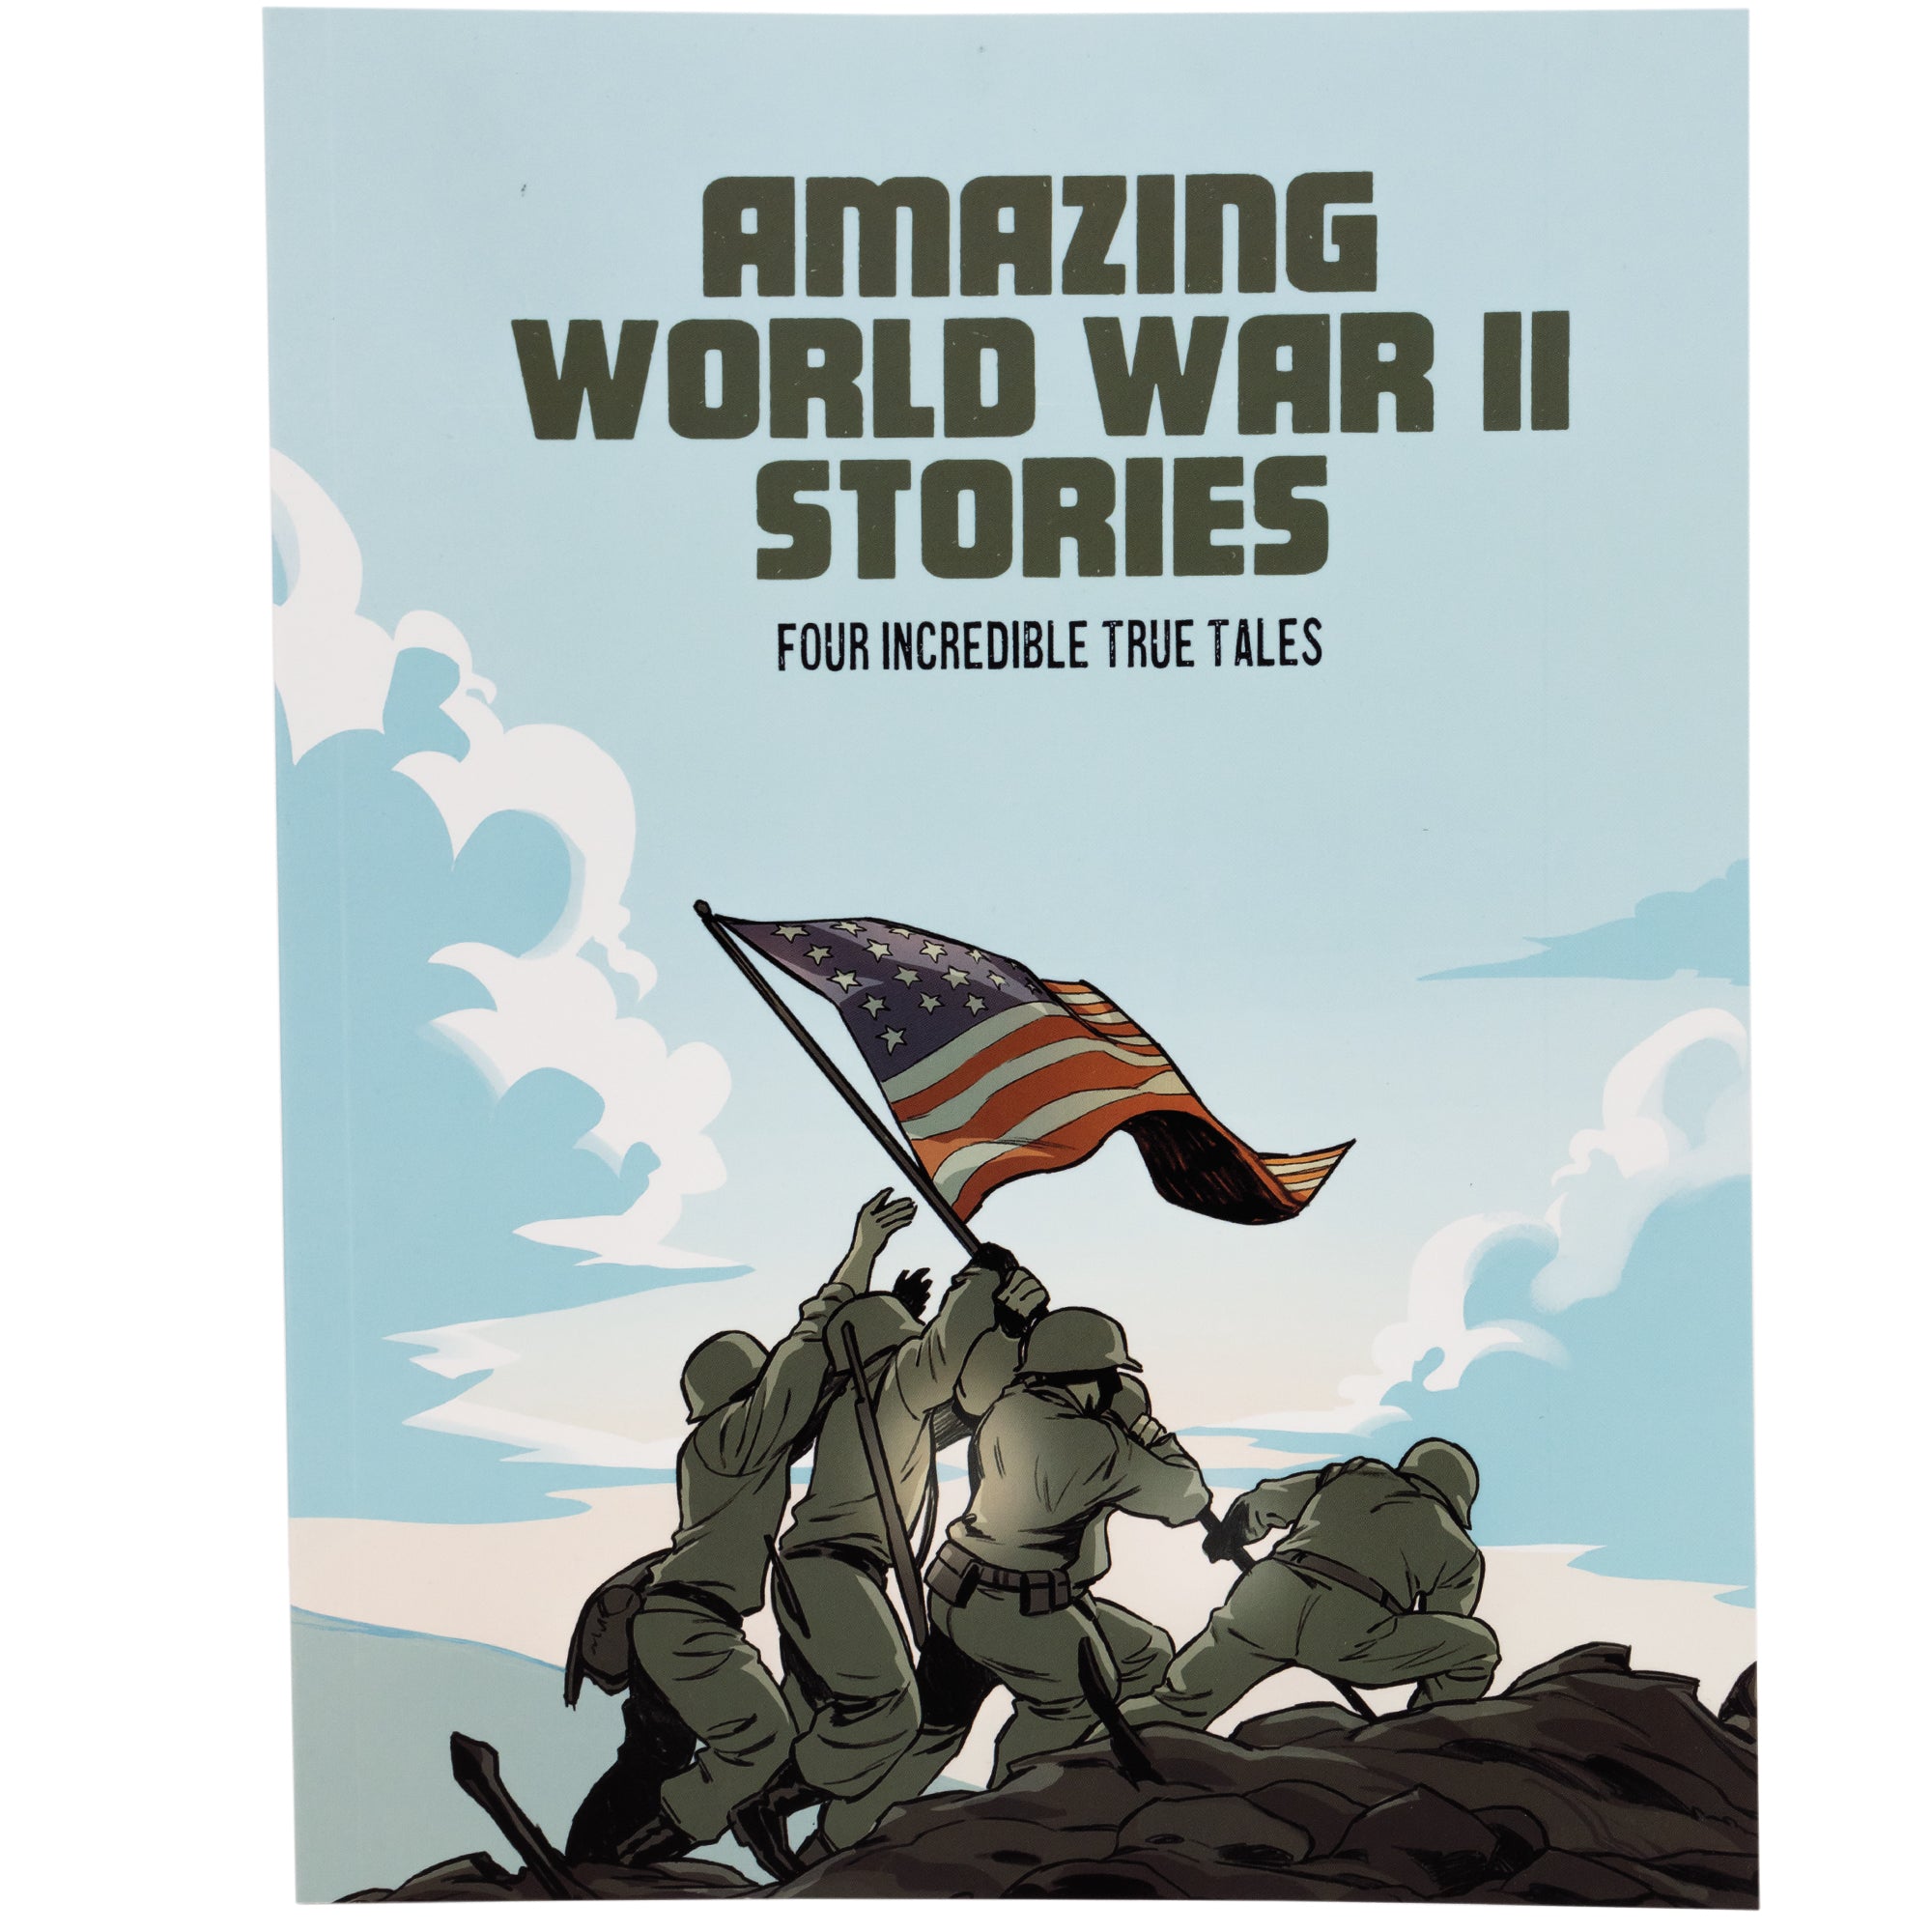 Amazing World War 2 Stories book cover. The cover is mainly a light blue sky with clouds. The illustration below shows 4 soldiers, in uniform, climbing a hill with an American flag to plant it in the ground. Under the title at the top, it reads “four incredible true tales.”